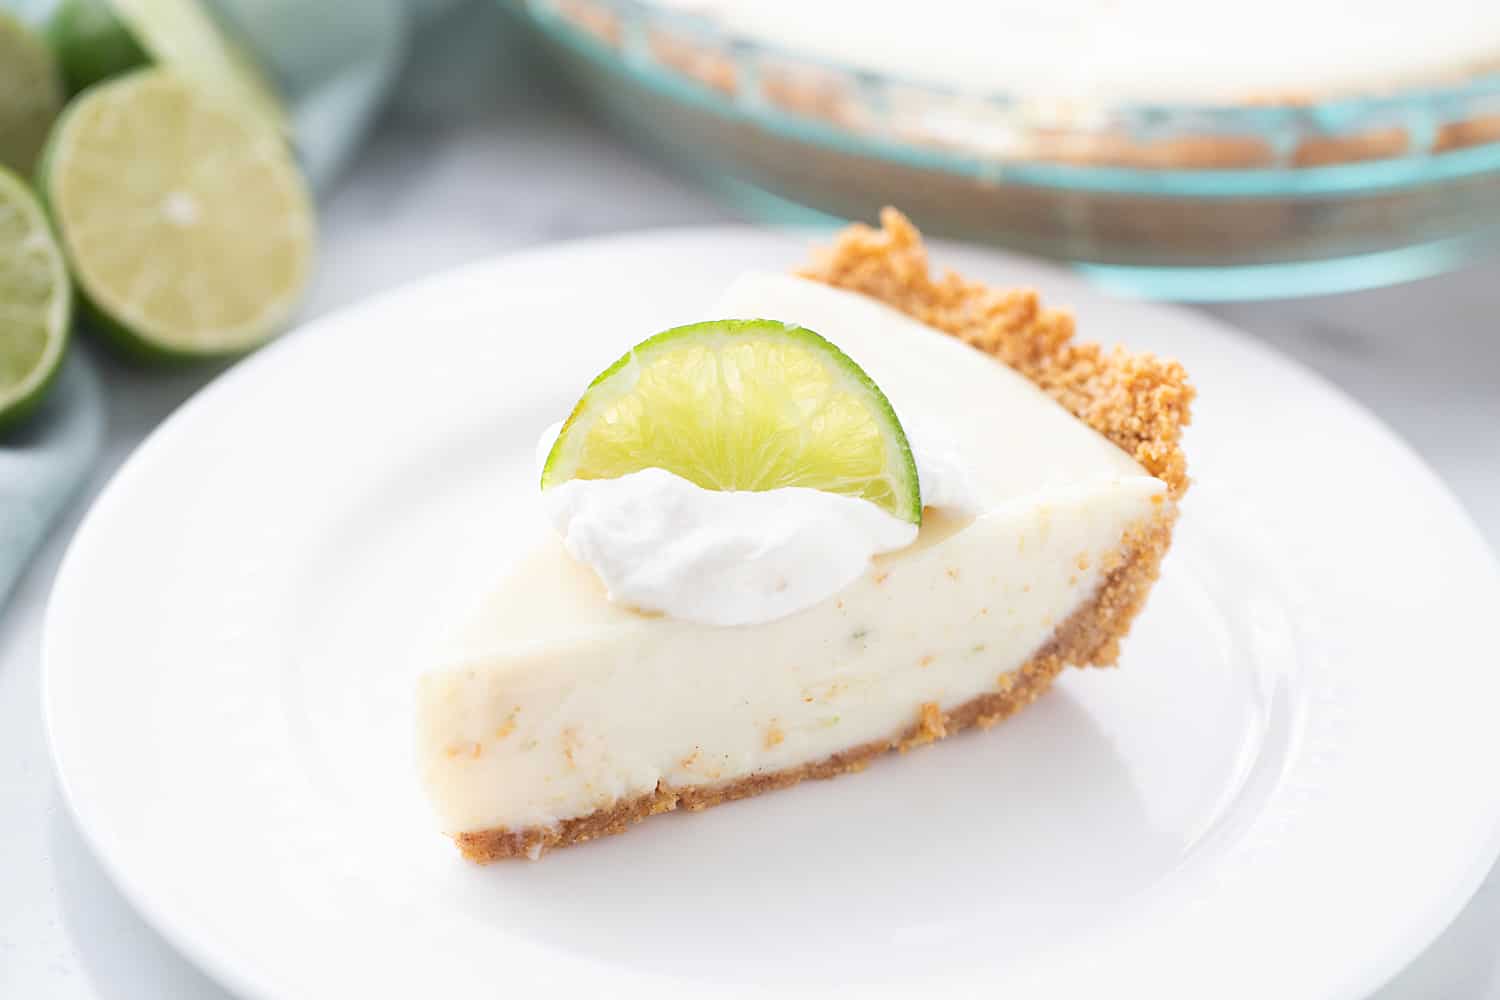 Easy Key Lime Pie with Homemade Whipped Cream - This easy key lime pie calls for a homemade graham cracker crust and the easiest pie filling ever. Top it with homemade whipped cream and it's always a hit! #keylime #keylimepie #whippedcream #dessert #baking #pie #lime #halfscratched